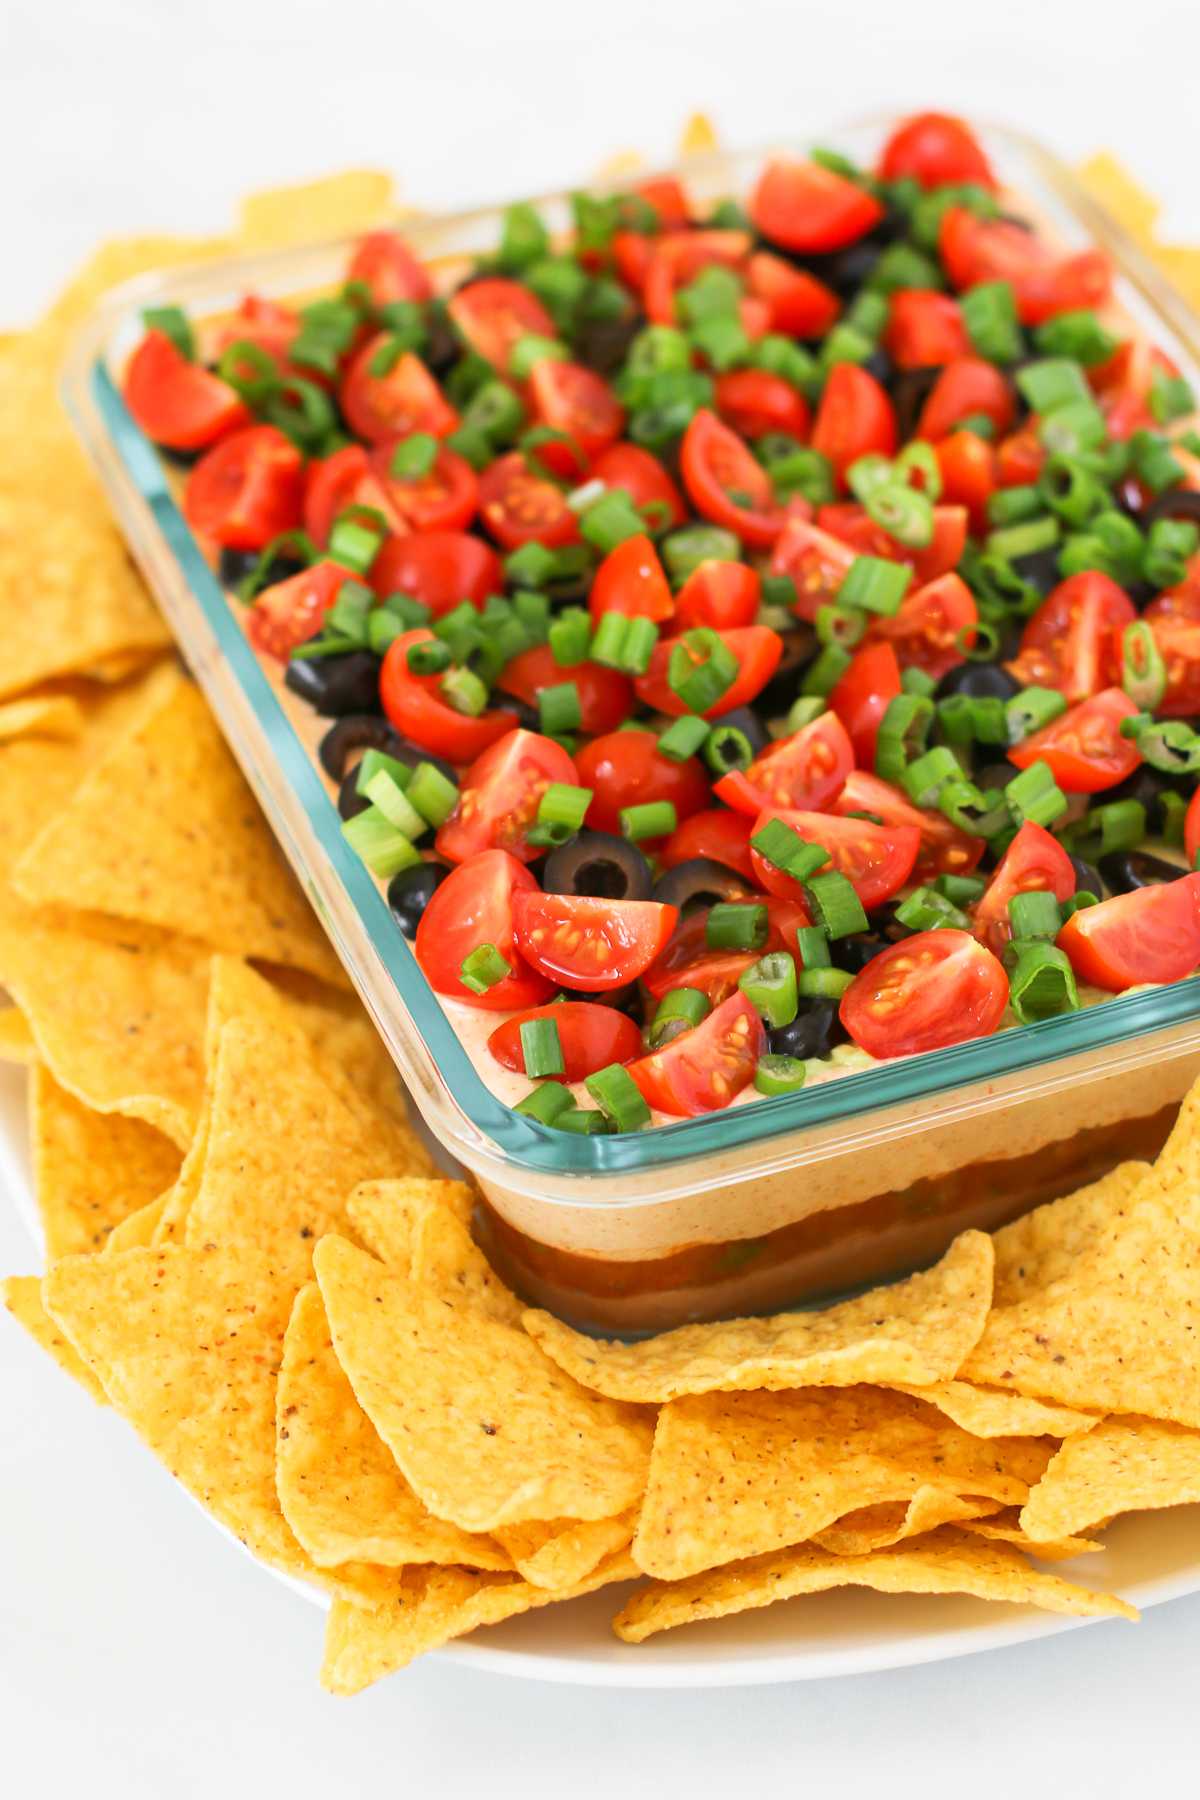 Vegan 7 Layer Bean Dip. Layers of beans, guacamole, creamy taco sauce, salsa and all of the vibrant Mexican flavors.